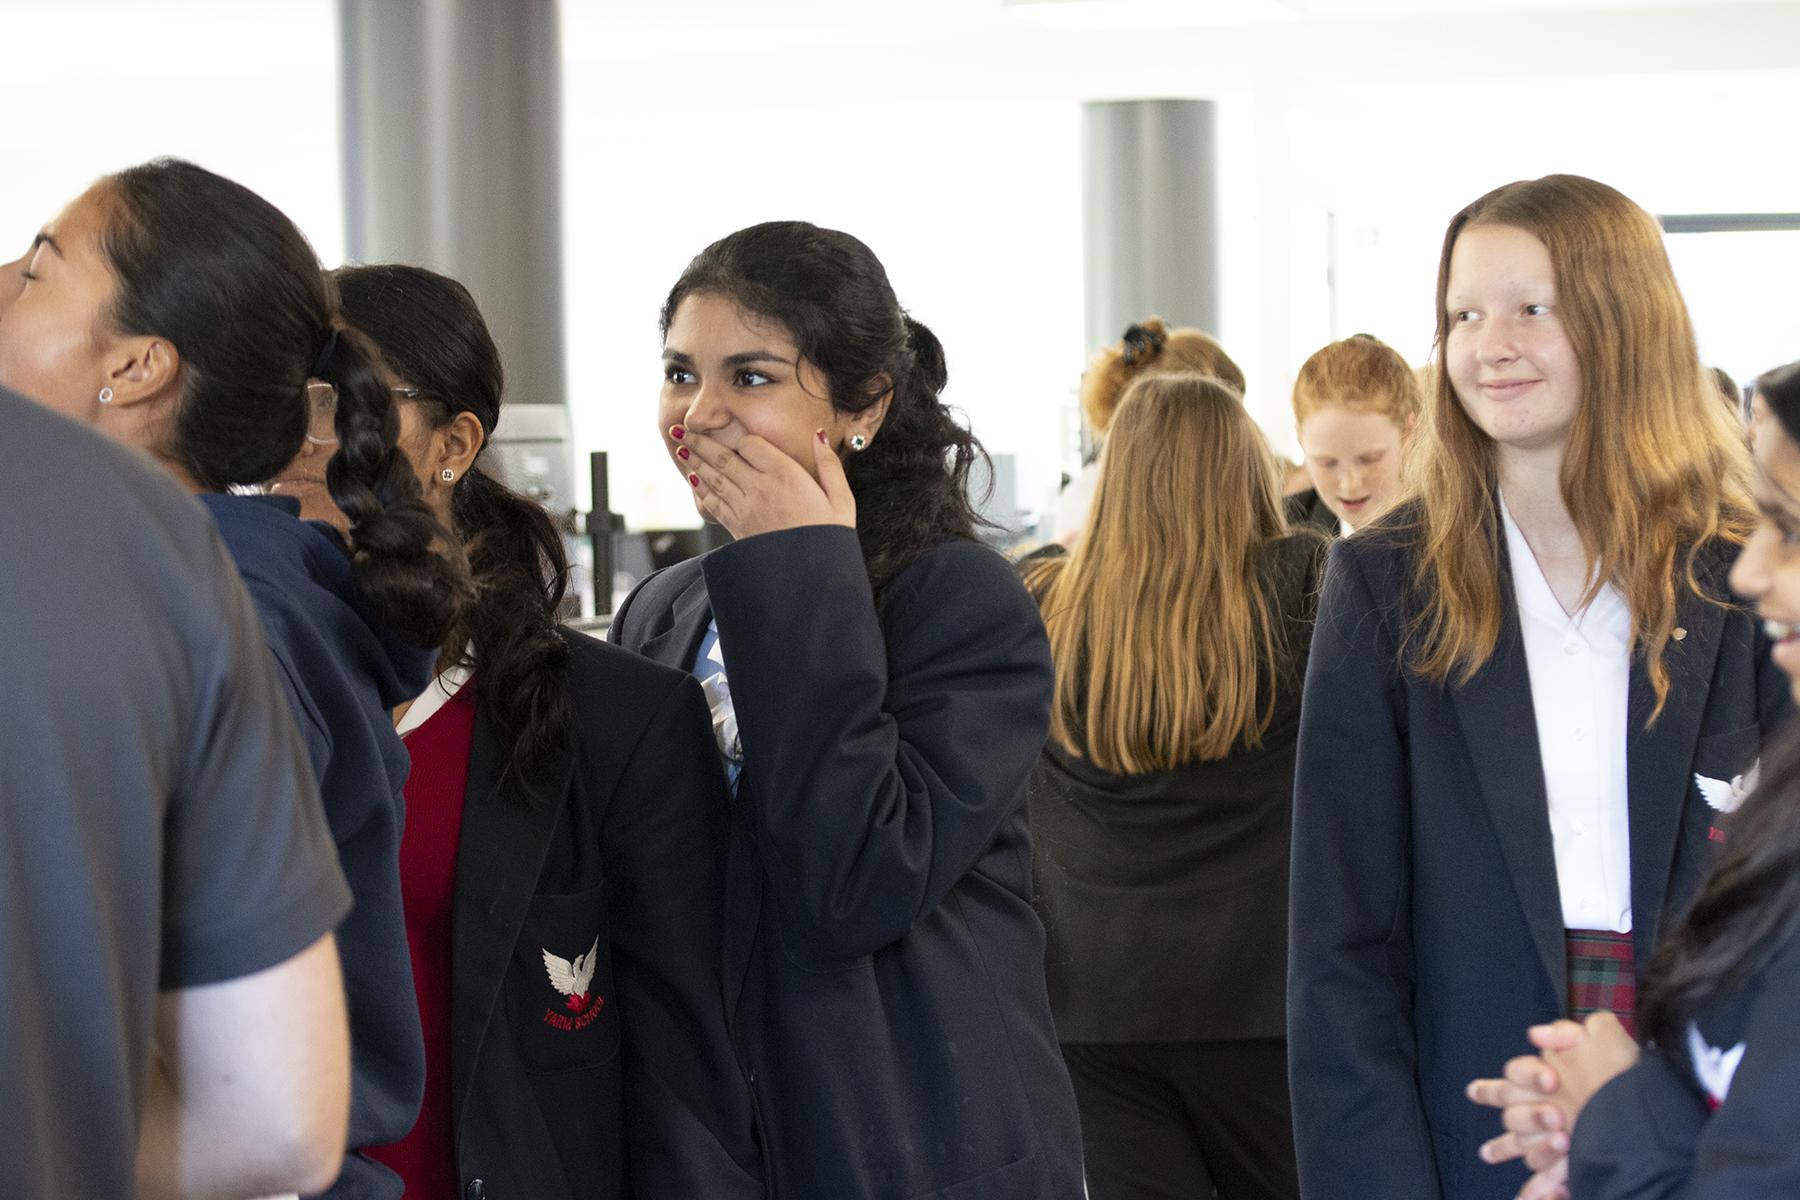 Female school students at Labman women in STEM event